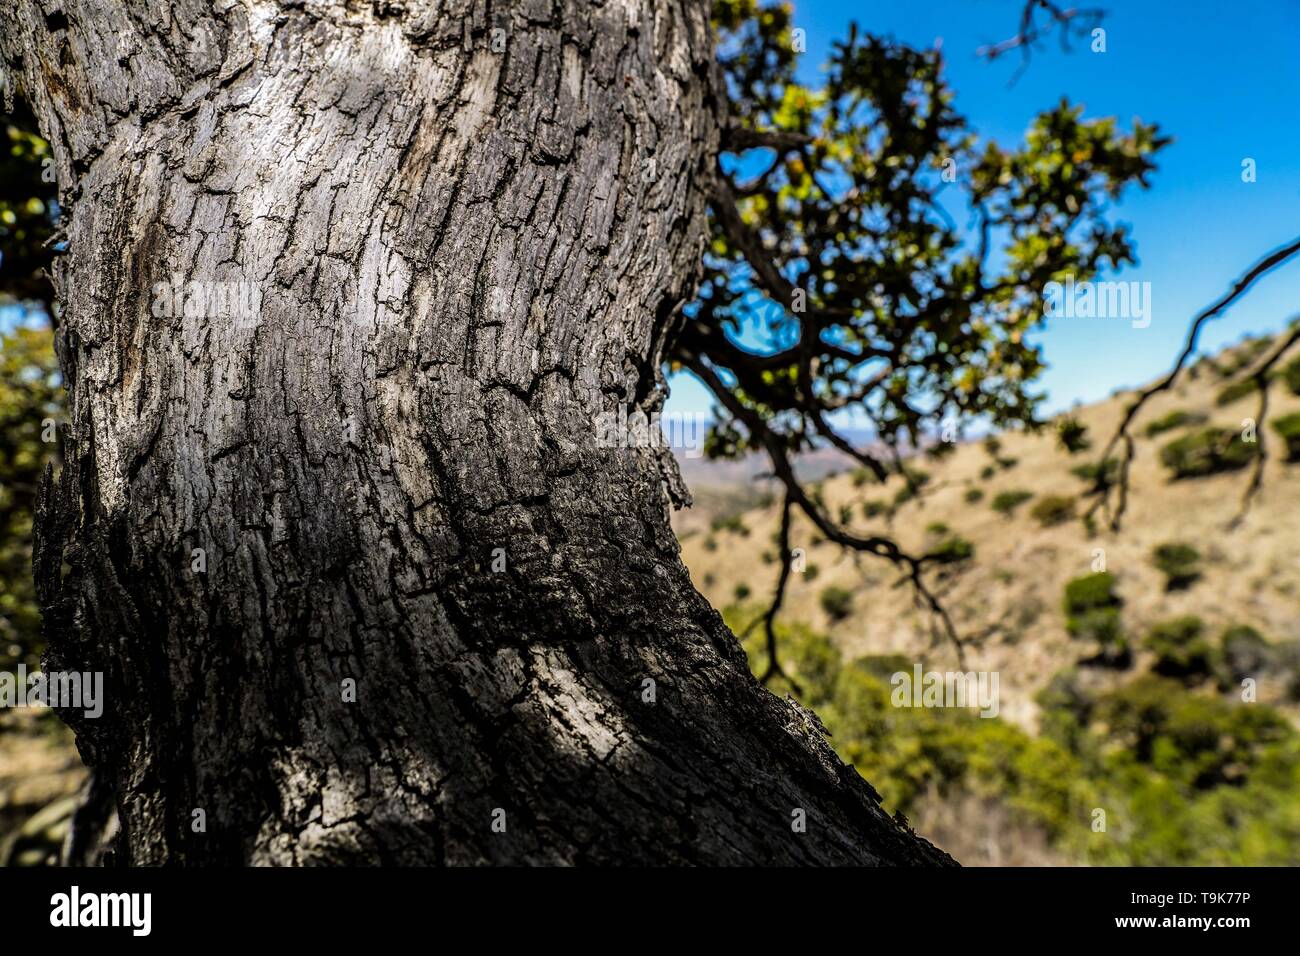 Oak tree forest, courtly, wood texture, trunk branches and oak tree leaves,  in the Chivato mountain range in the municipality of Santa Cruz, Sonora,  Mexico. (photo: Luis Gutierrez / nortephoto) bosque de